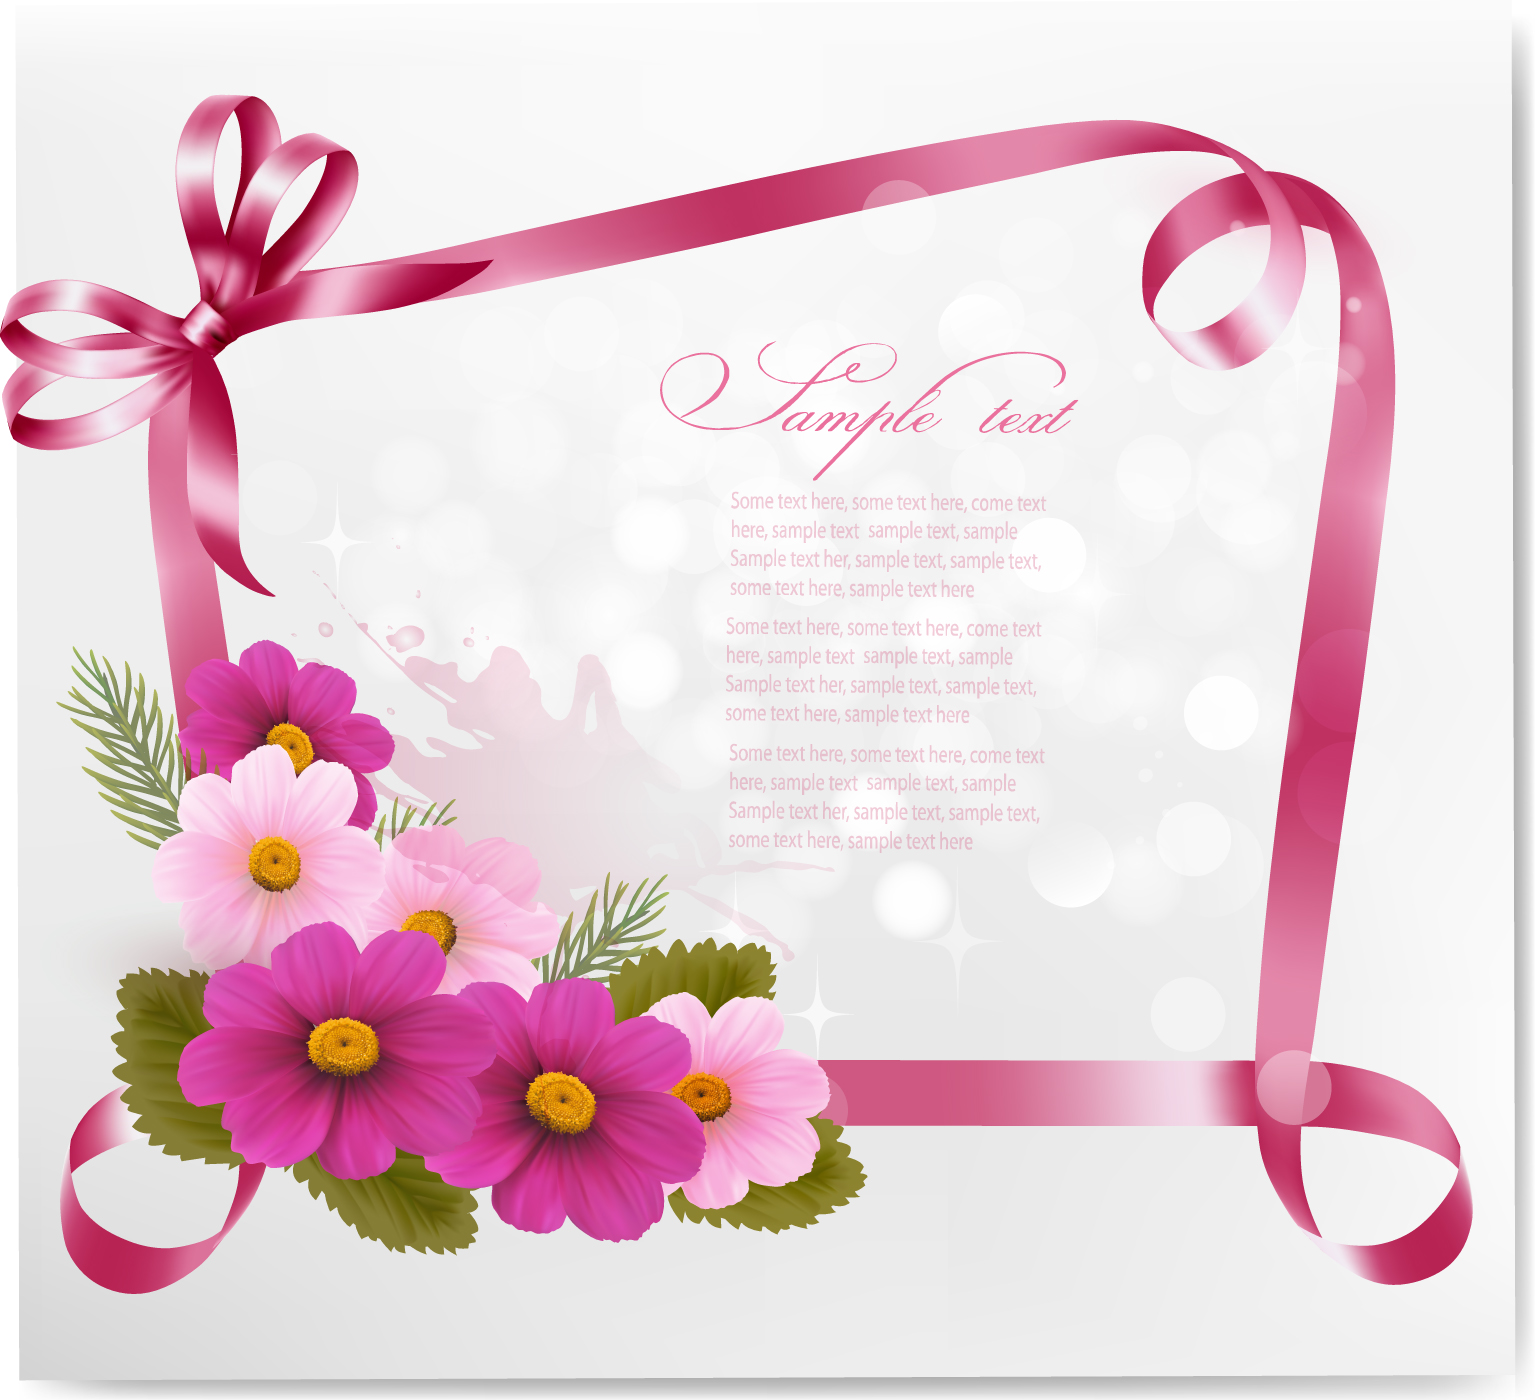 Ribbon with flower greeting card vector 02 – Over millions vectors